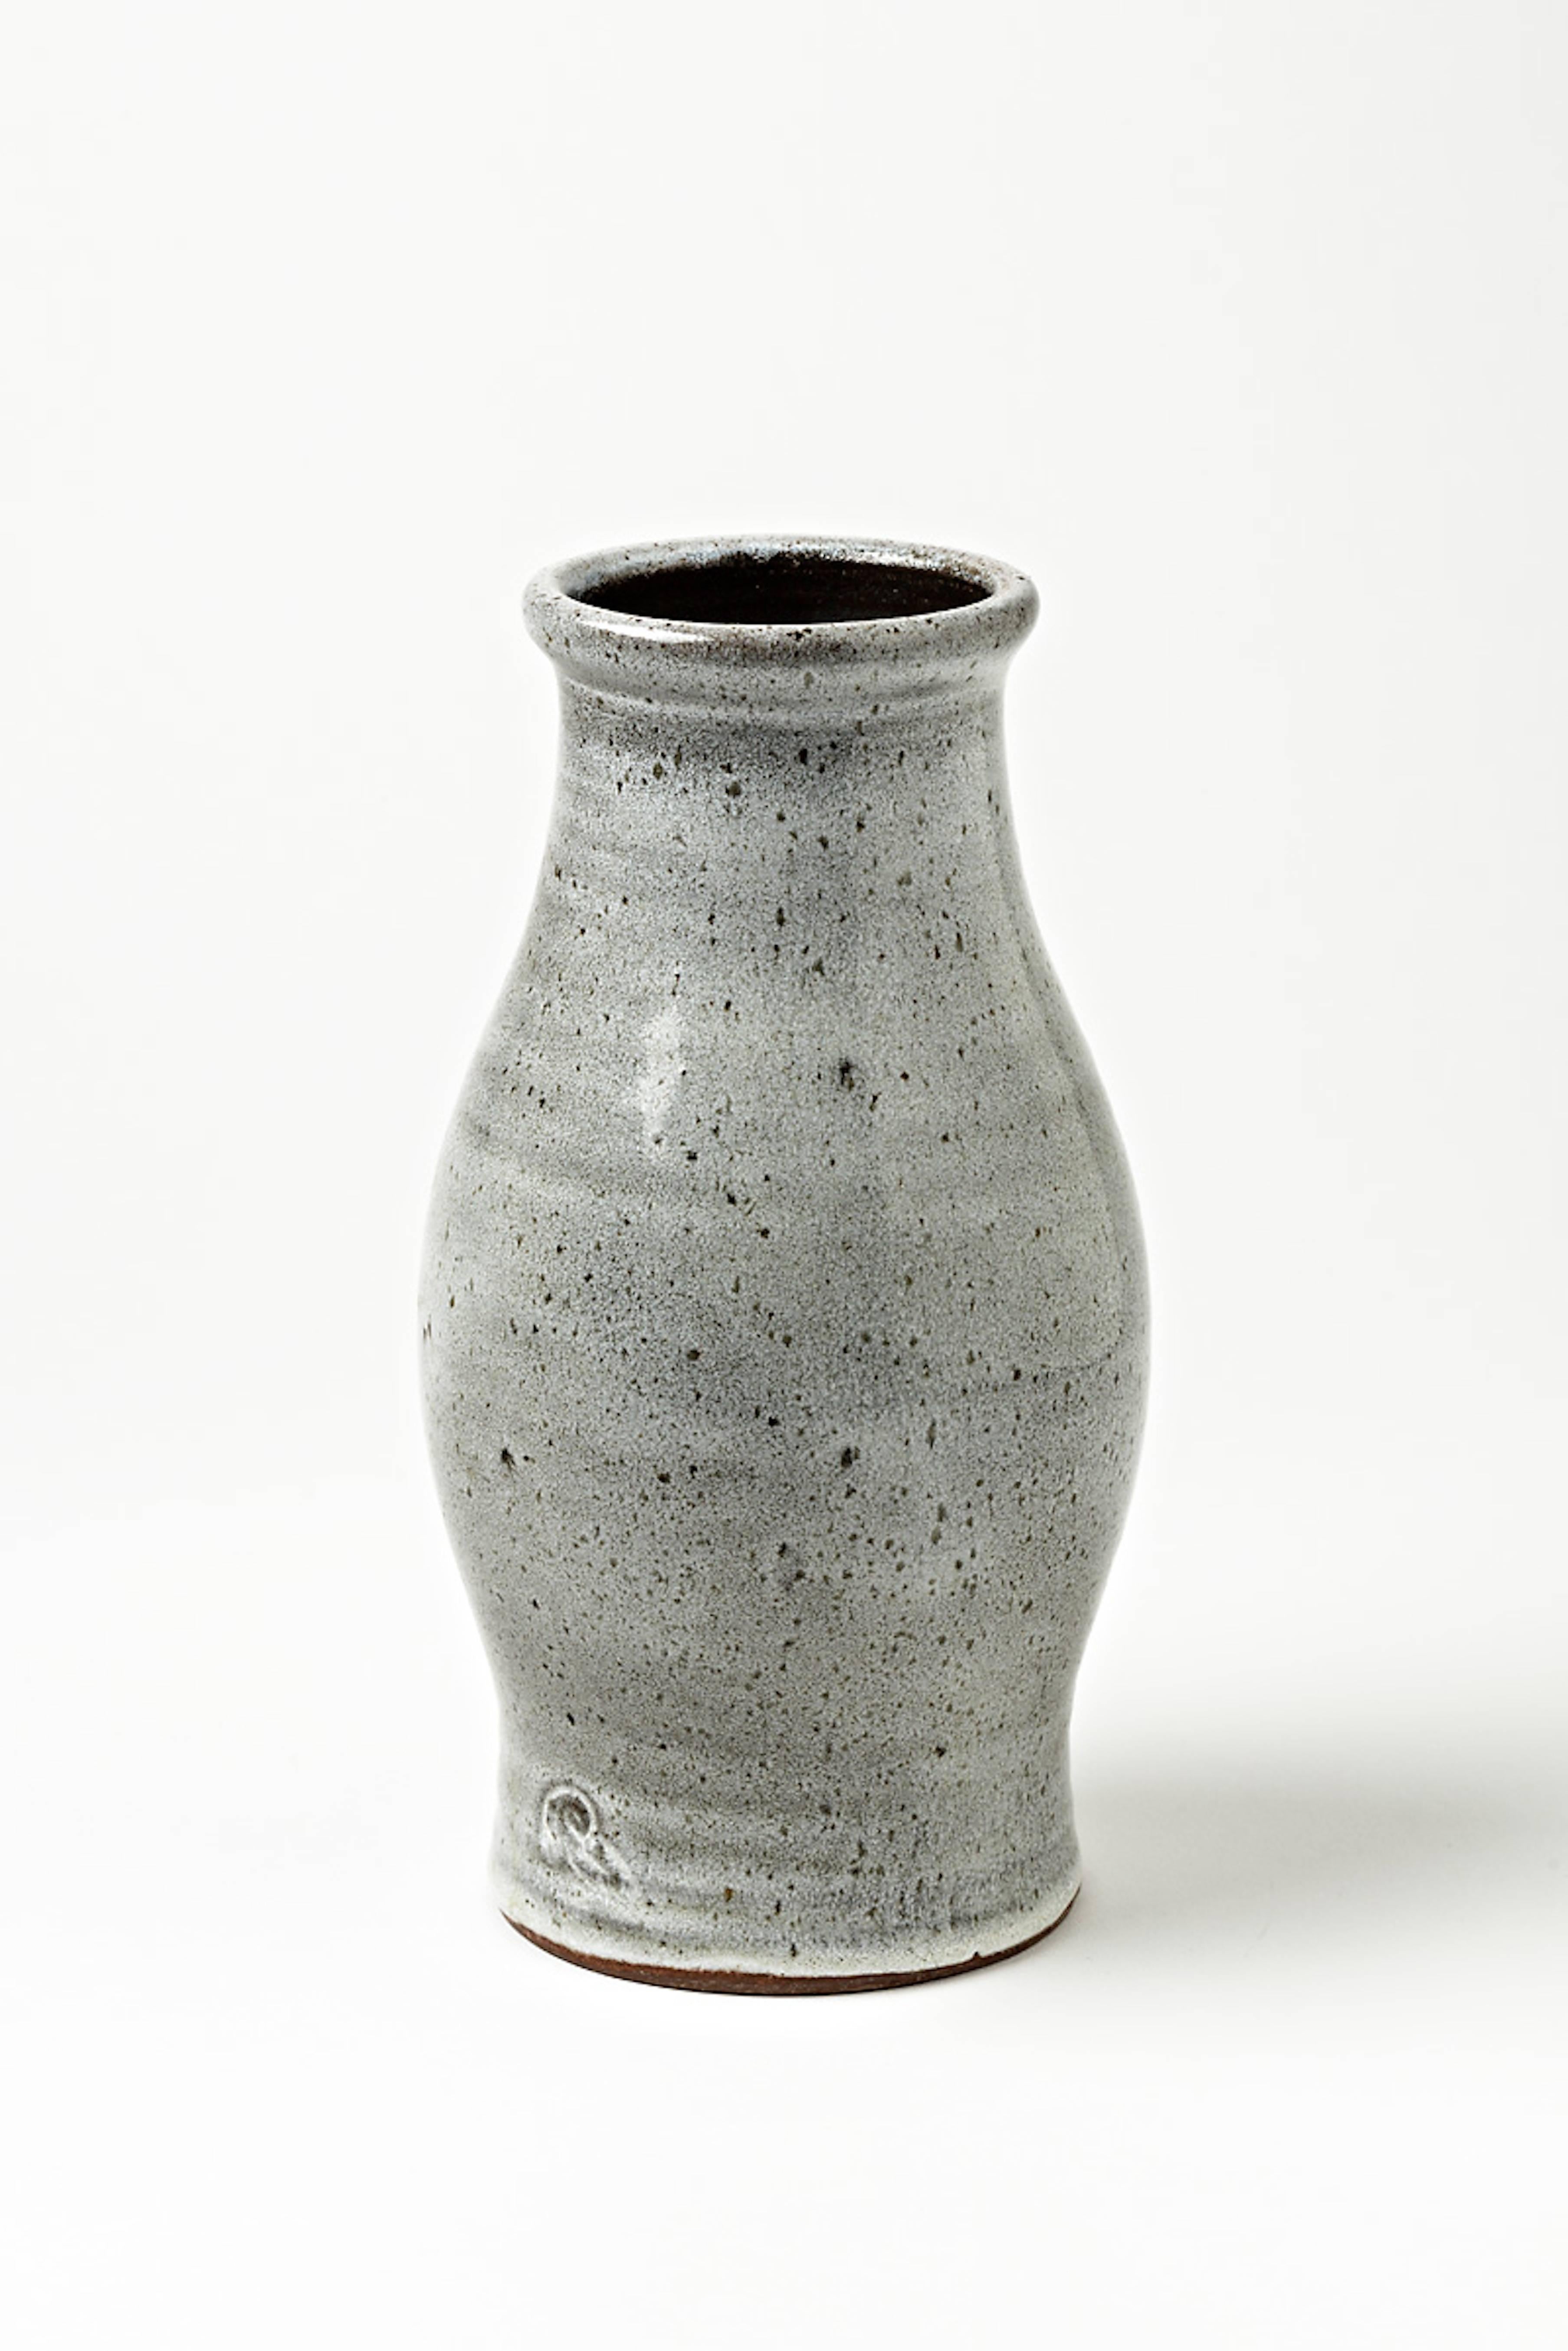 A stoneware vase with white glaze decoration by the workshop Pierlot, Ratilly, France.
Signature at the base.
Perfect original conditions,
circa 1980-1990.